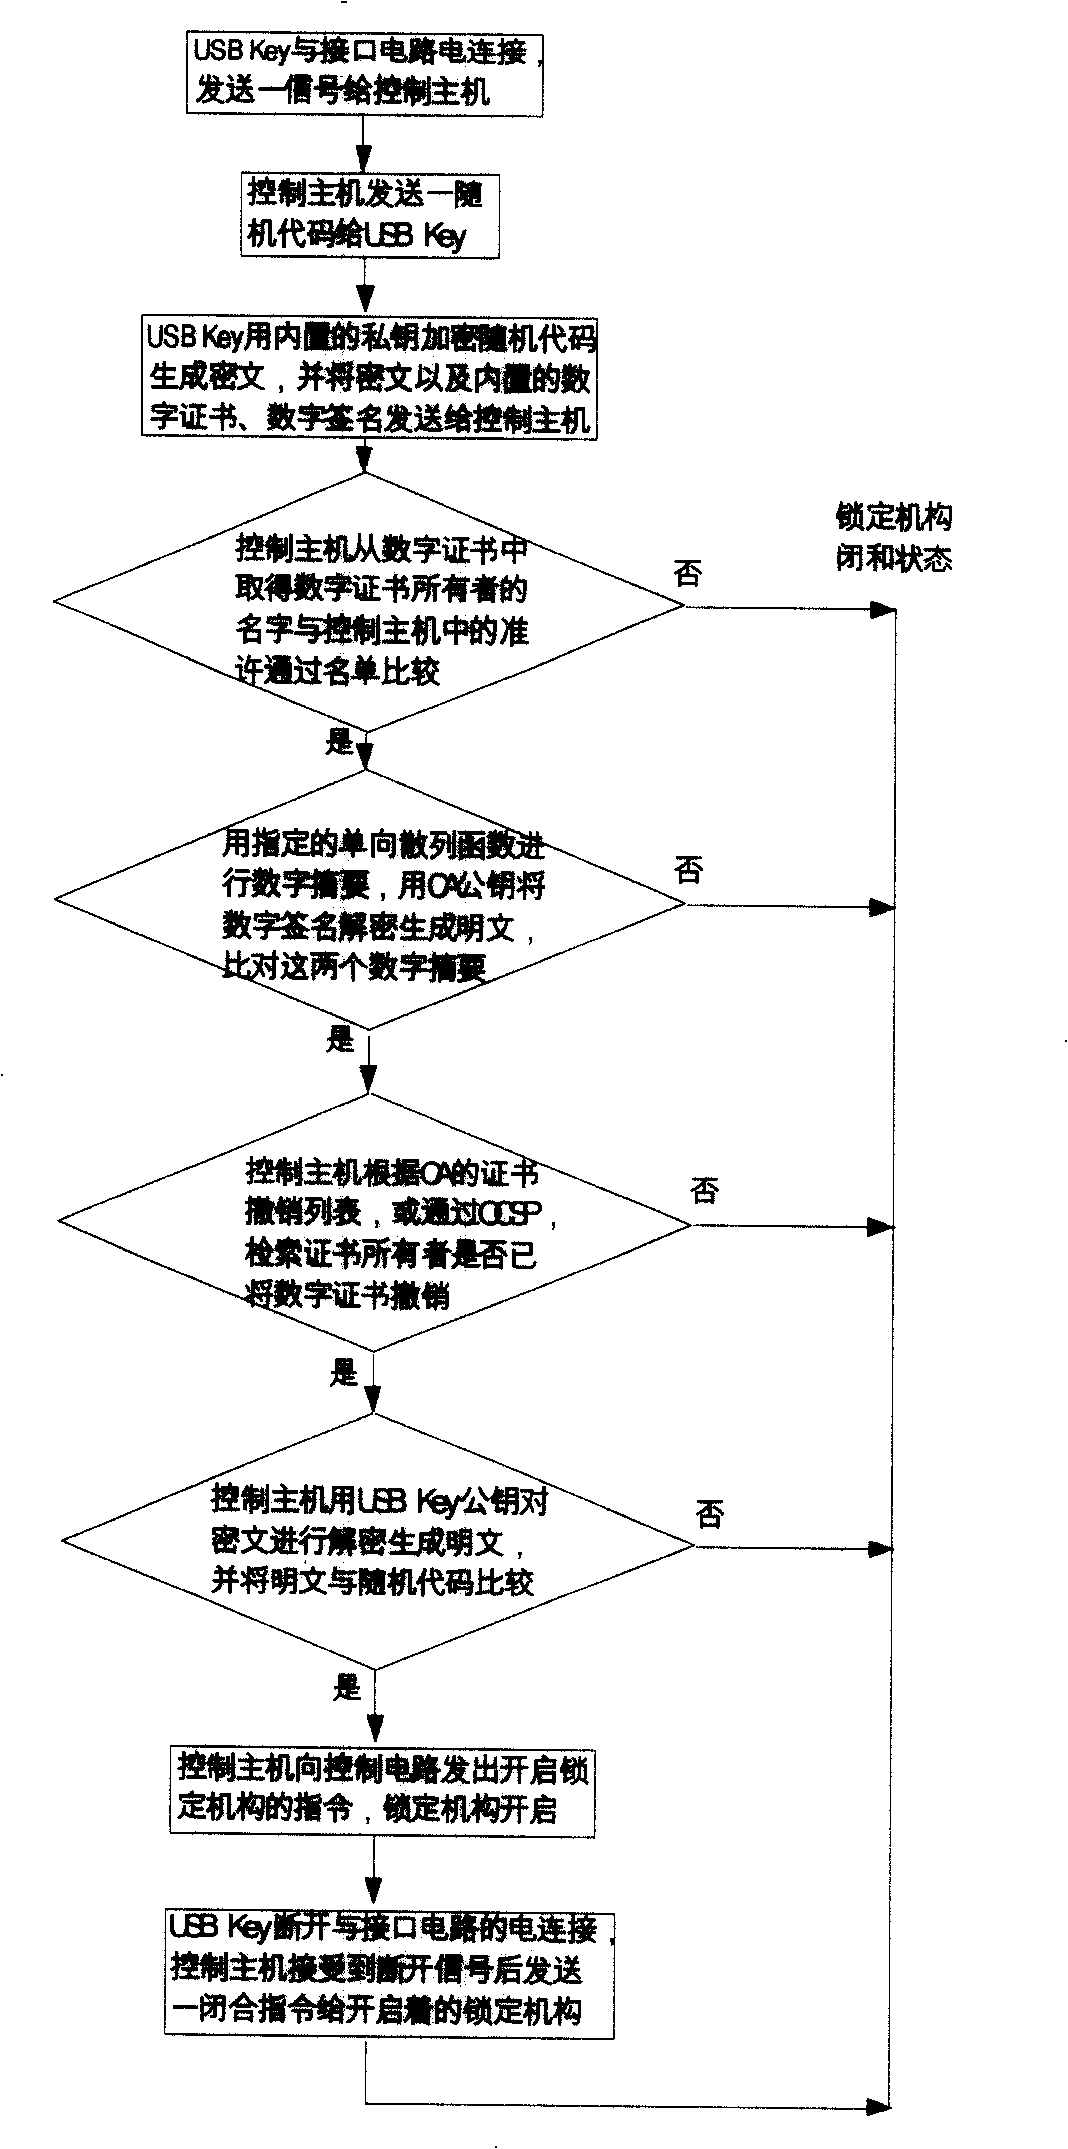 Digital authentication control method for access control system and access control system using the same